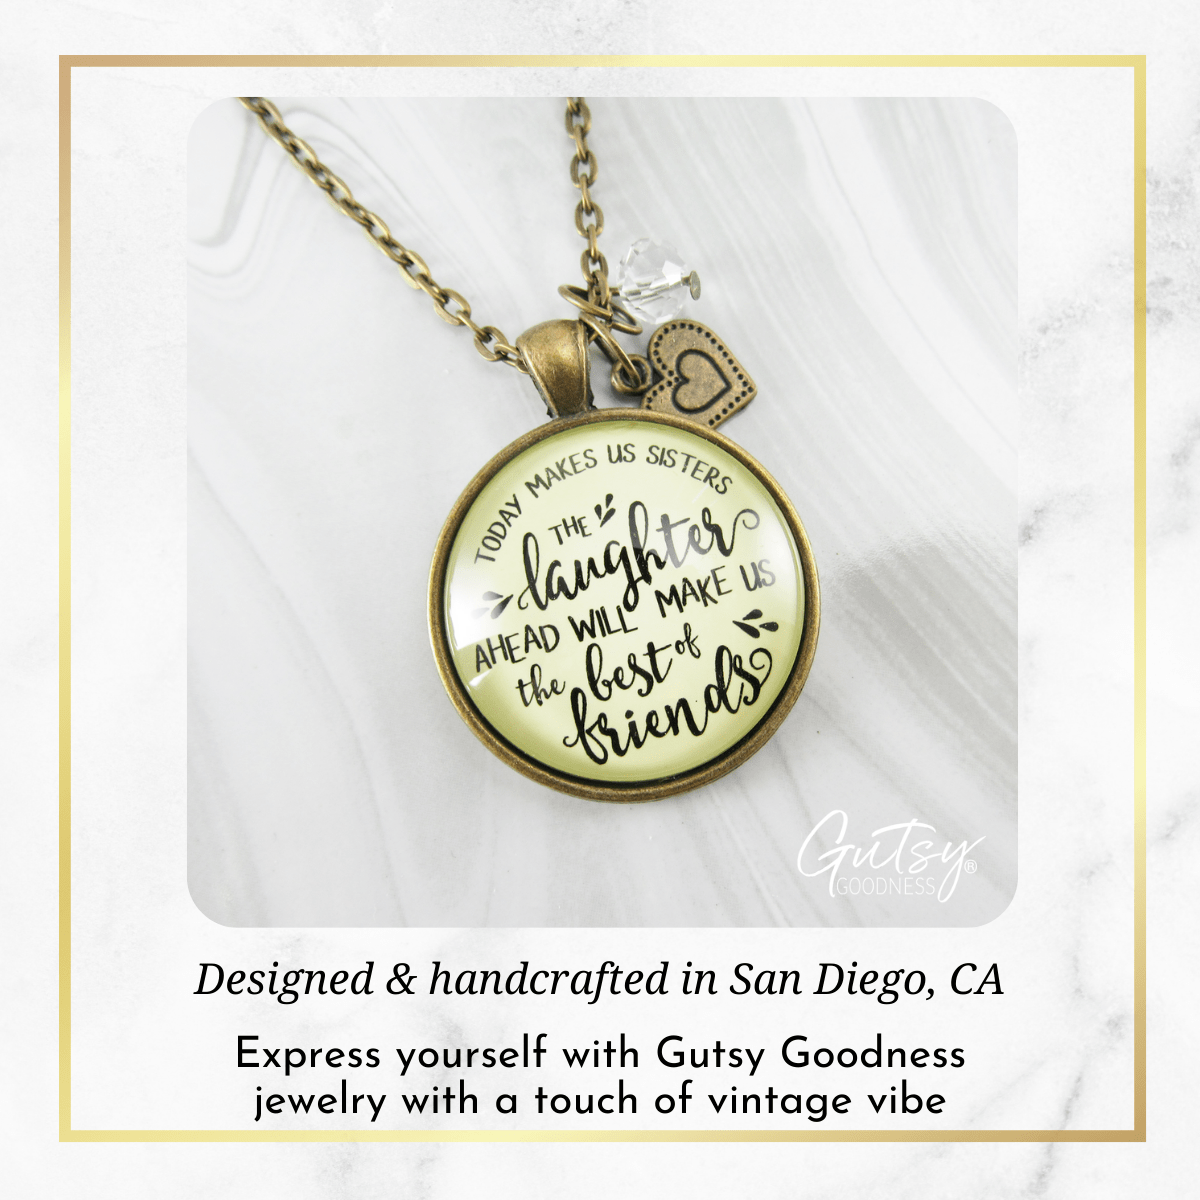 Gutsy Goodness Sister in Law Necklace Today Makes Us Sisters Wedding Day Gift - Gutsy Goodness;Sister In Law Necklace Today Makes Us Sisters Wedding Day Gift - Gutsy Goodness Handmade Jewelry Gifts